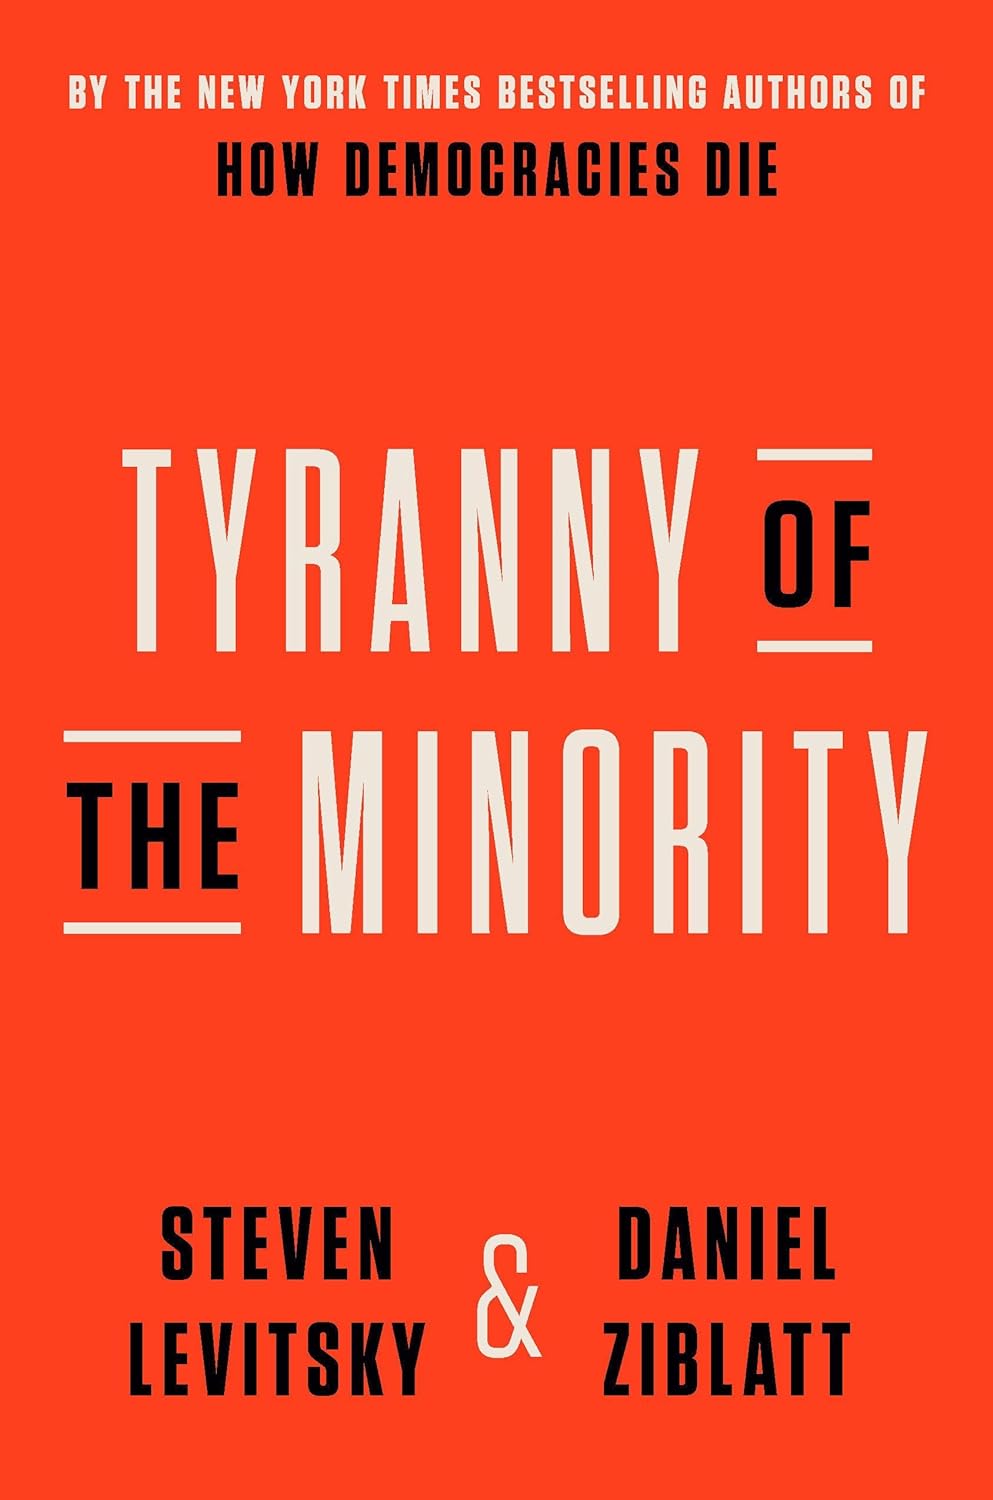 First Tuesday Talk book discussion of Tyranny of the Minority